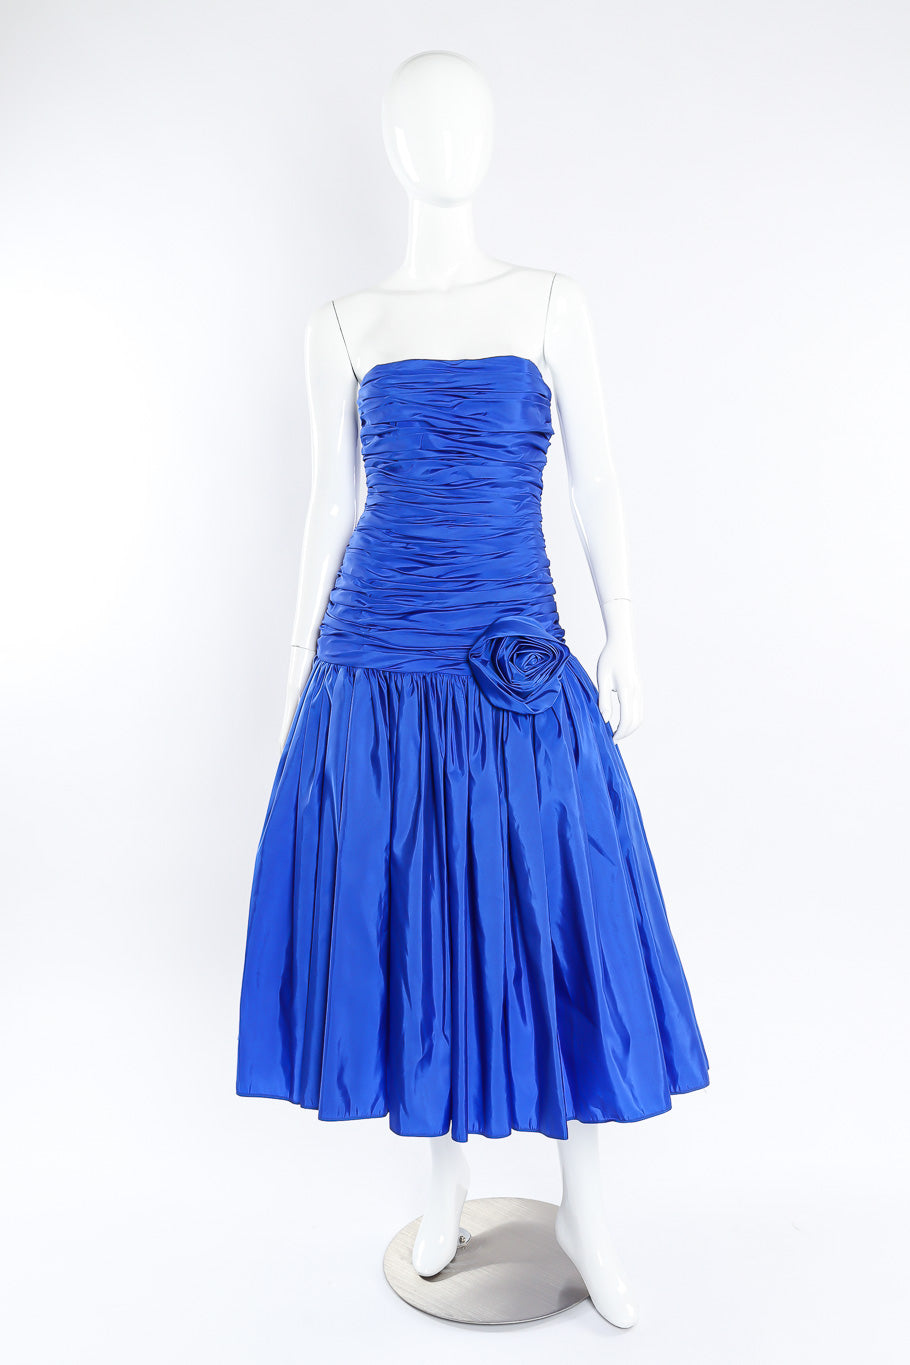 Strapless party dress by Victor Costa on mannequin front full @recessla